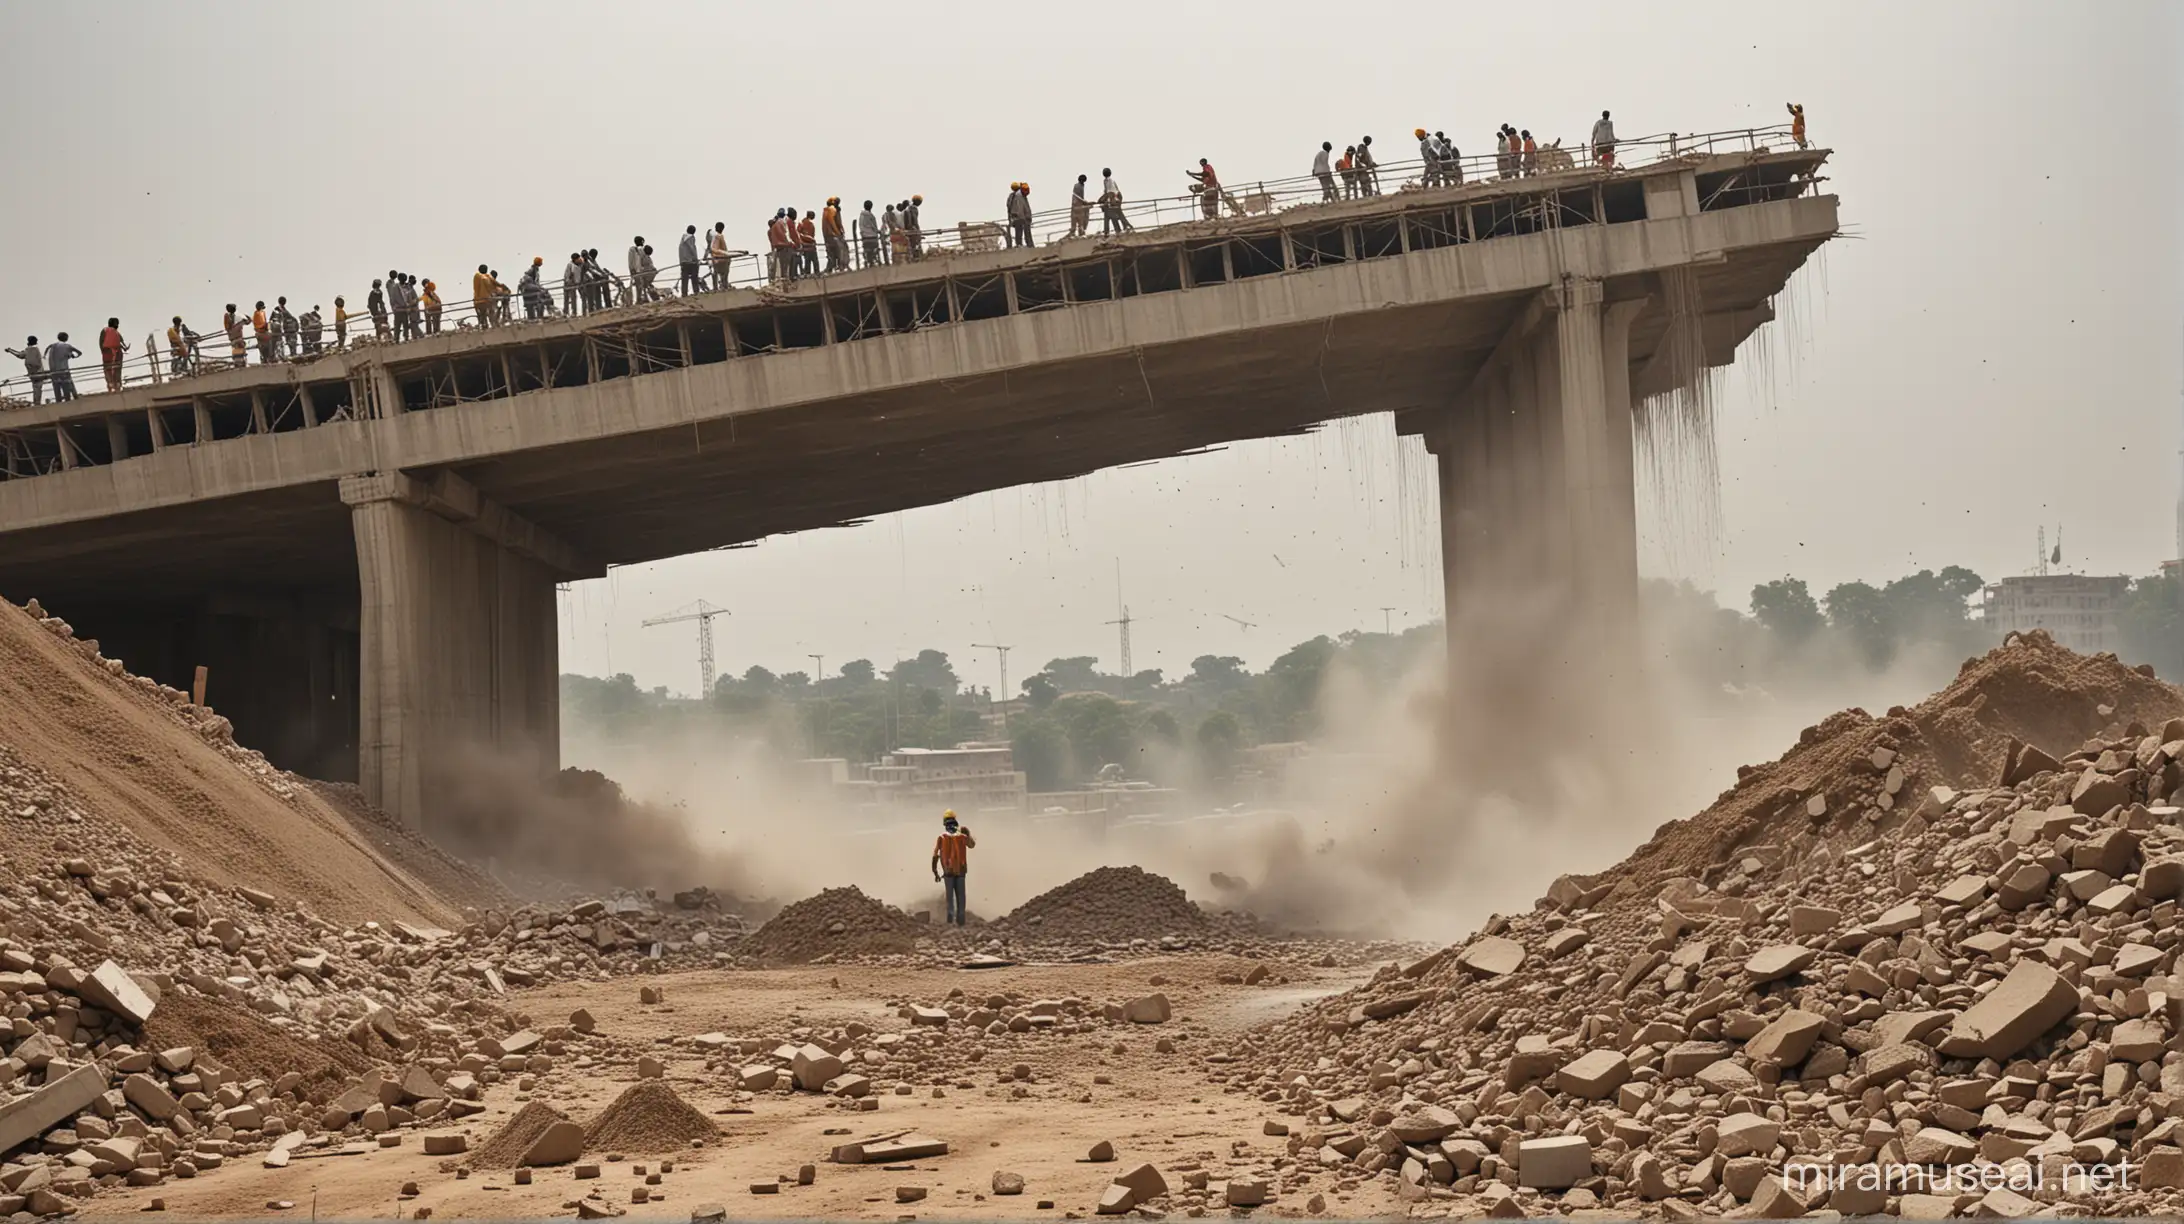 Capture a moment of disaster and aftermath: Illustrate the scene of an under-construction bridge collapsing in India. Show the bridge structure in mid-collapse, with debris falling and dust rising. Include workers and onlookers in the background, showcasing the chaos and urgency of the situation. The image should convey the destruction and impact of the collapse, highlighting the need for safety measures in construction projects